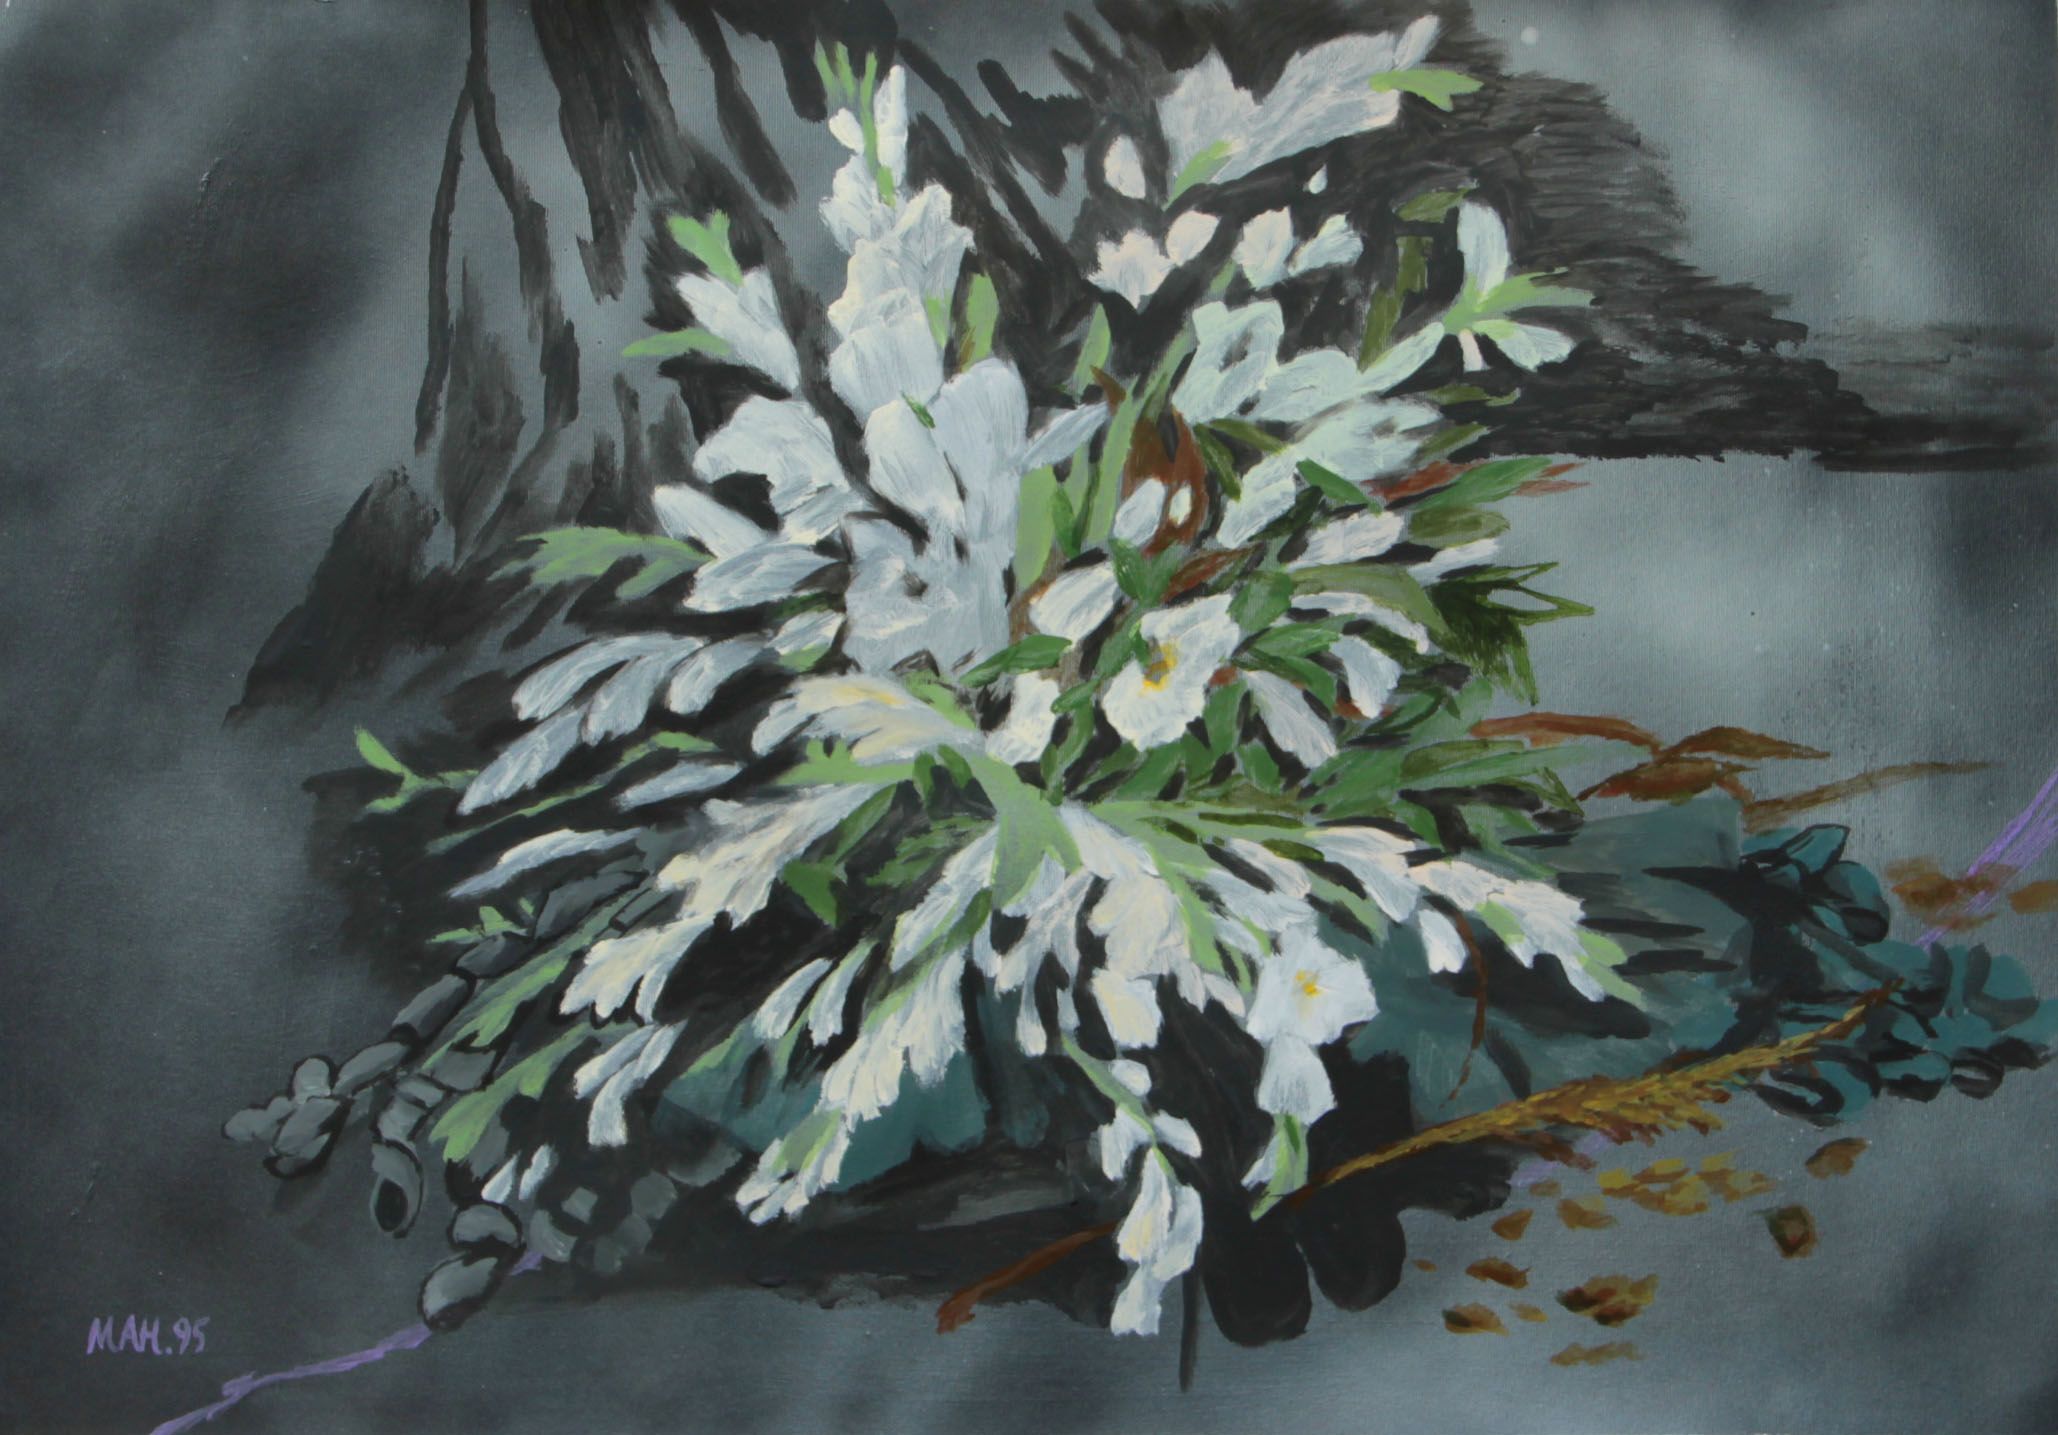 Funeral Flowers No.2, 2016, Acrylic and oil spray on cardboard, 46 x 66 cm